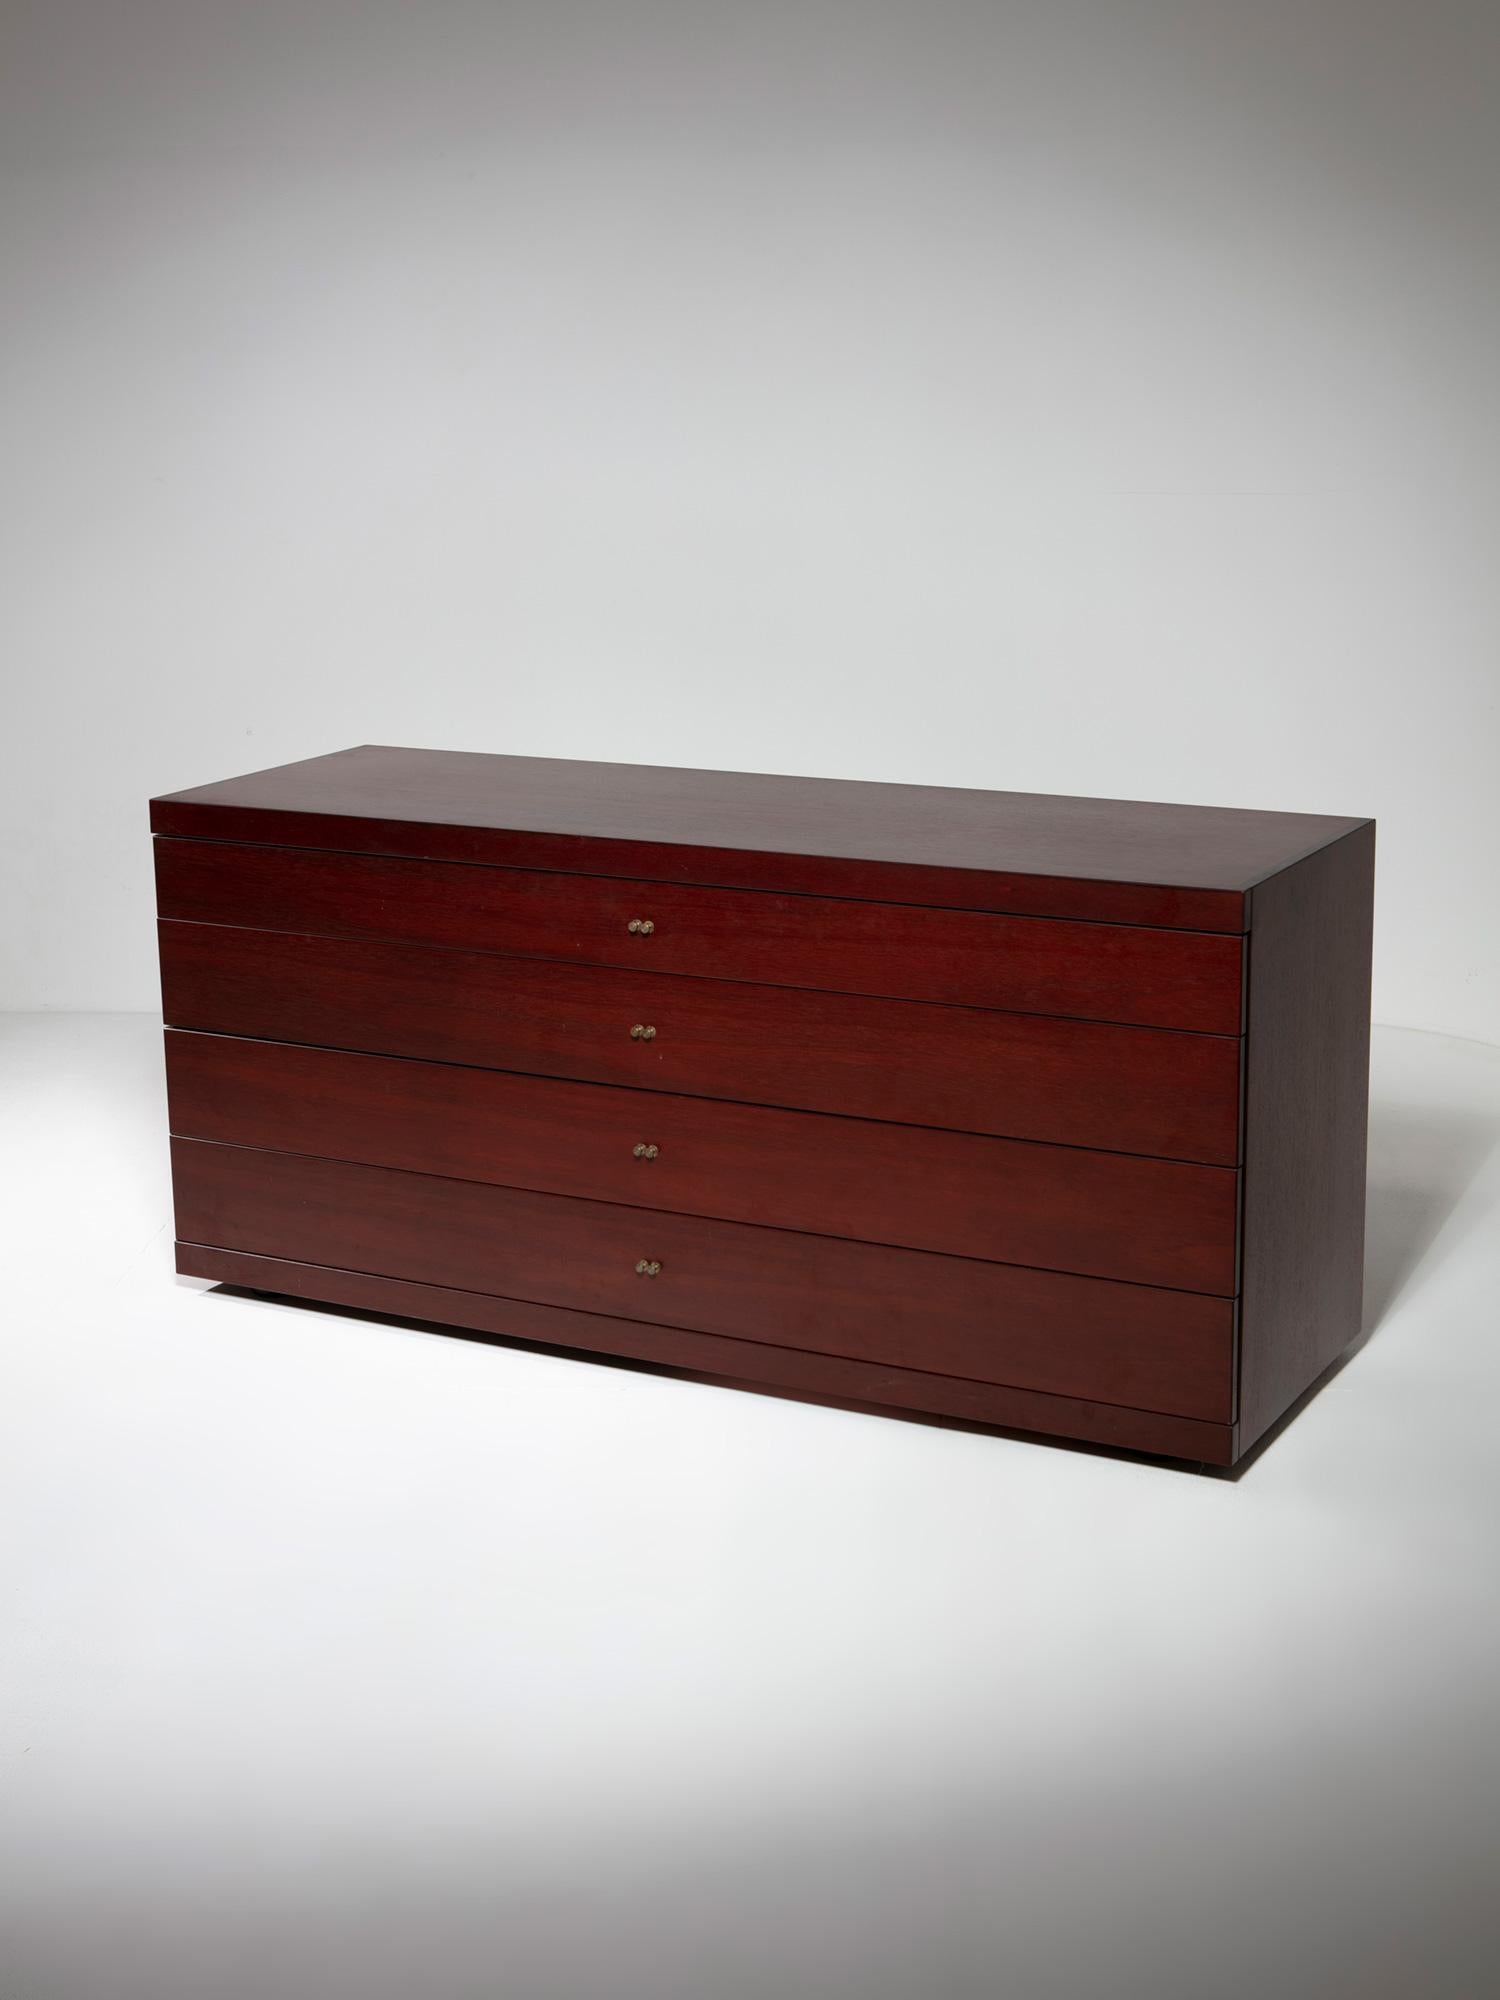 Italian Capable MB84 Wood Chest of Drawers by Roberto Poggi for Poggi, Italy, 1990s For Sale